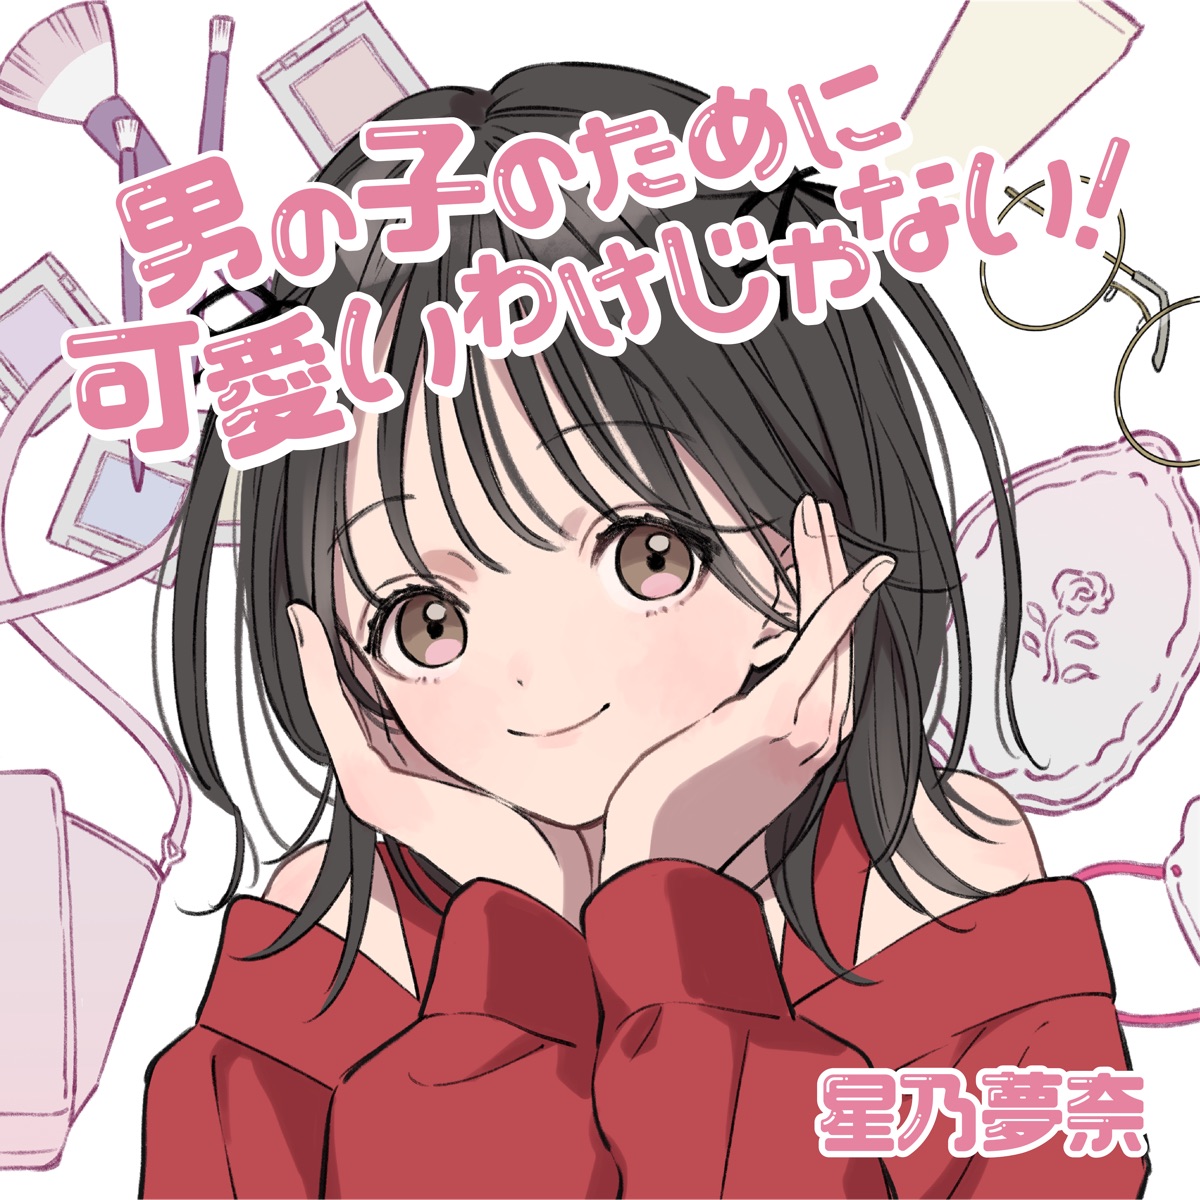 Cover art for『Yuna Hoshino - 男の子のために可愛いわけじゃない！』from the release『Kawaii for Myself